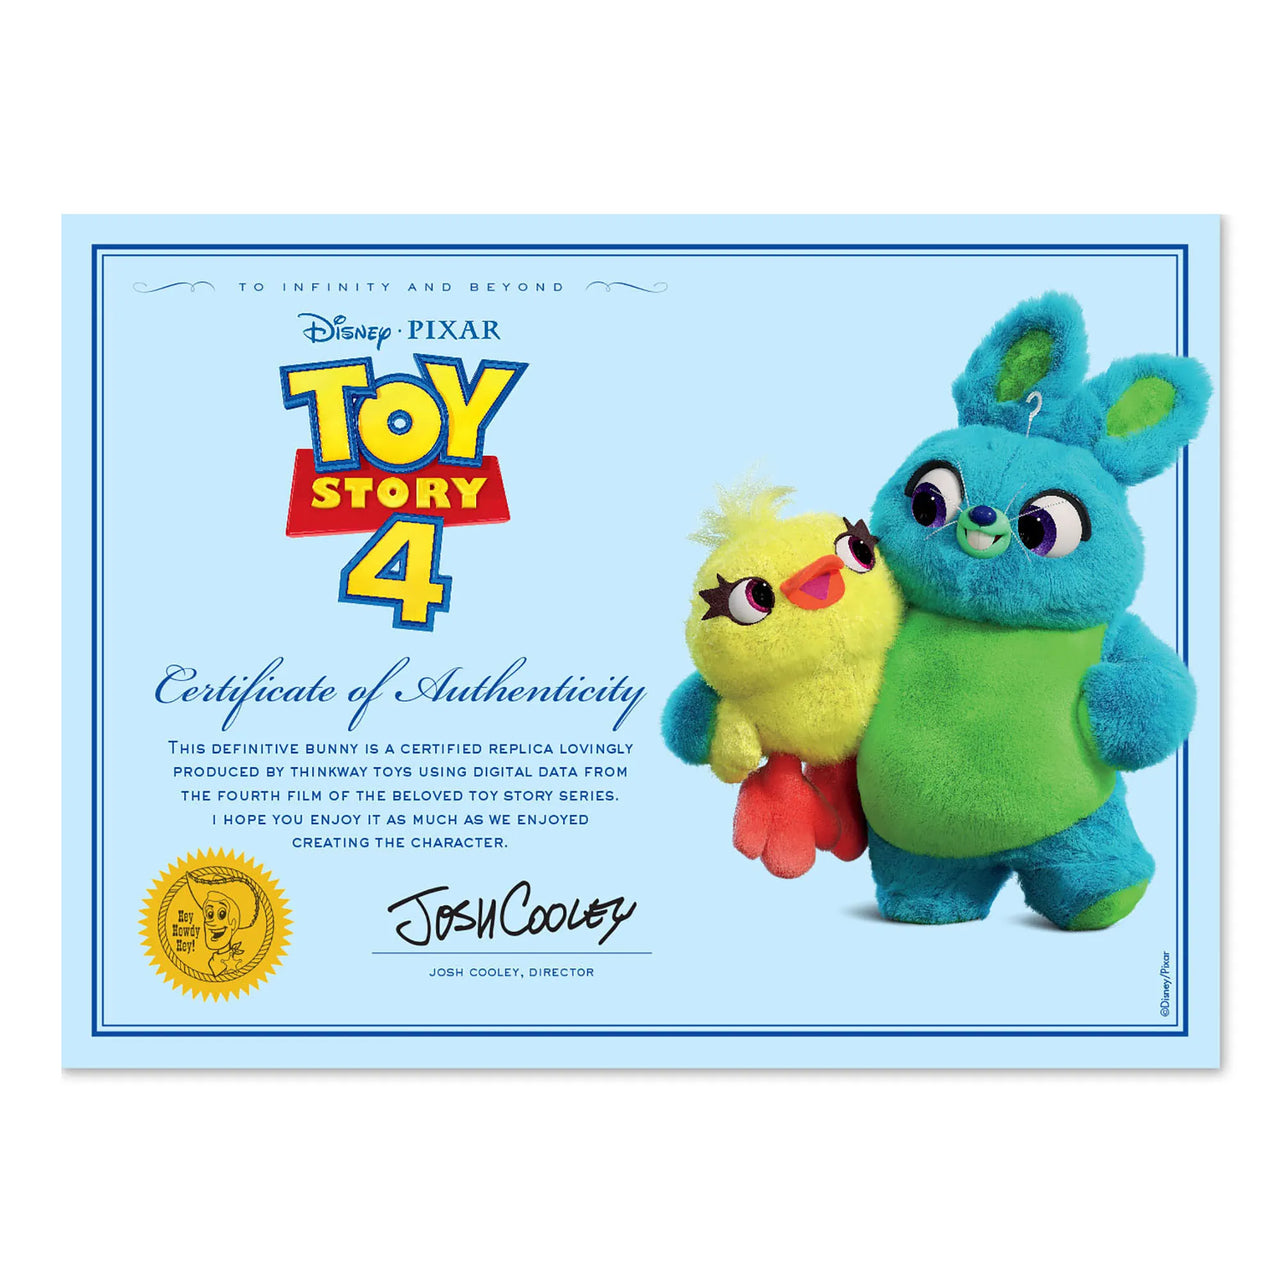 Toy Story 4 Signature Collection Bunny Deluxe Carnival Plush